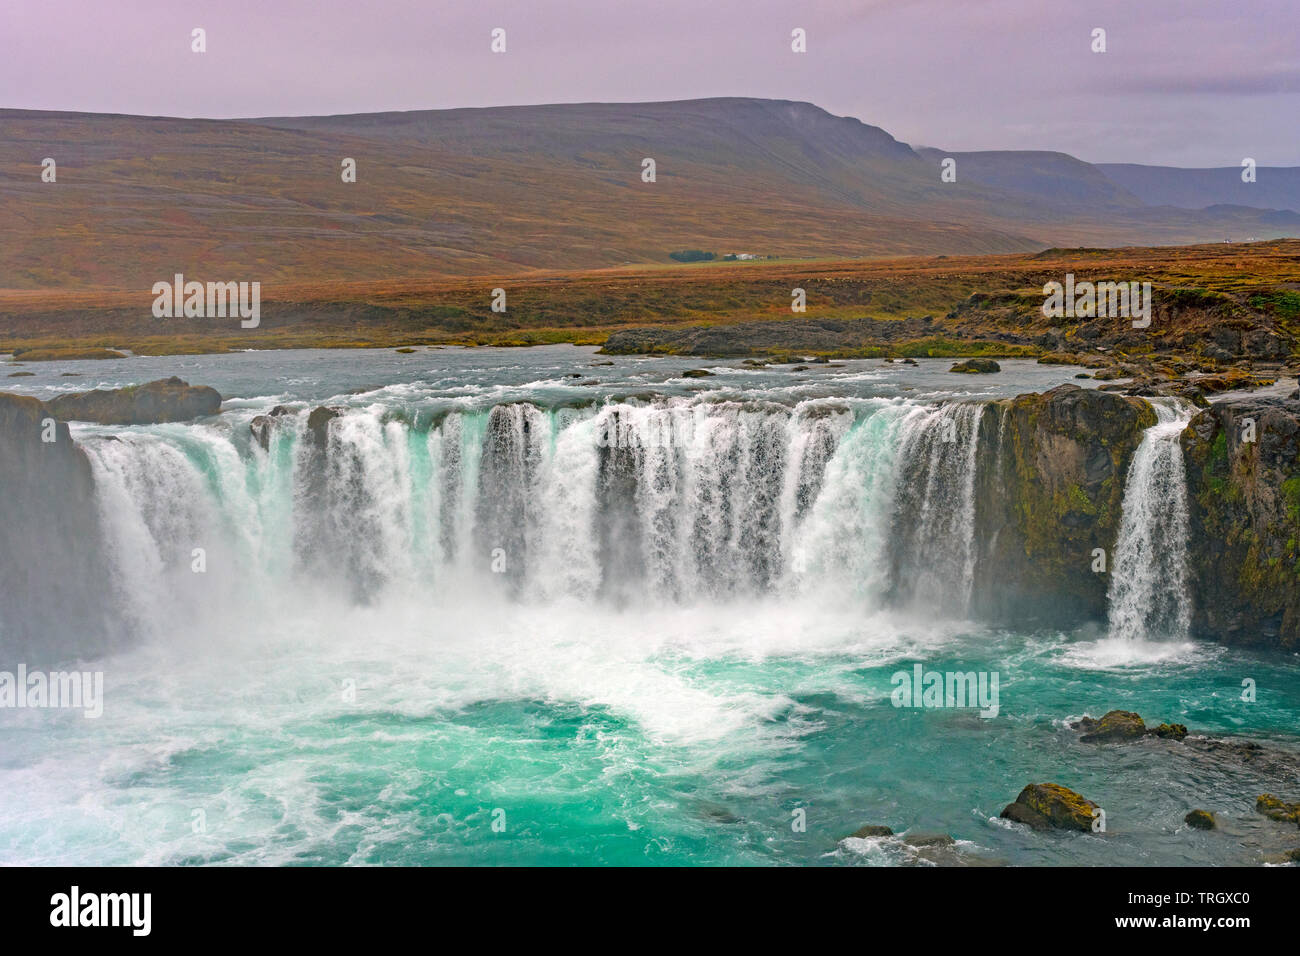 Dramatic Godafoss Falls on a Tundra Landscape in Northern Iceland Stock Photo